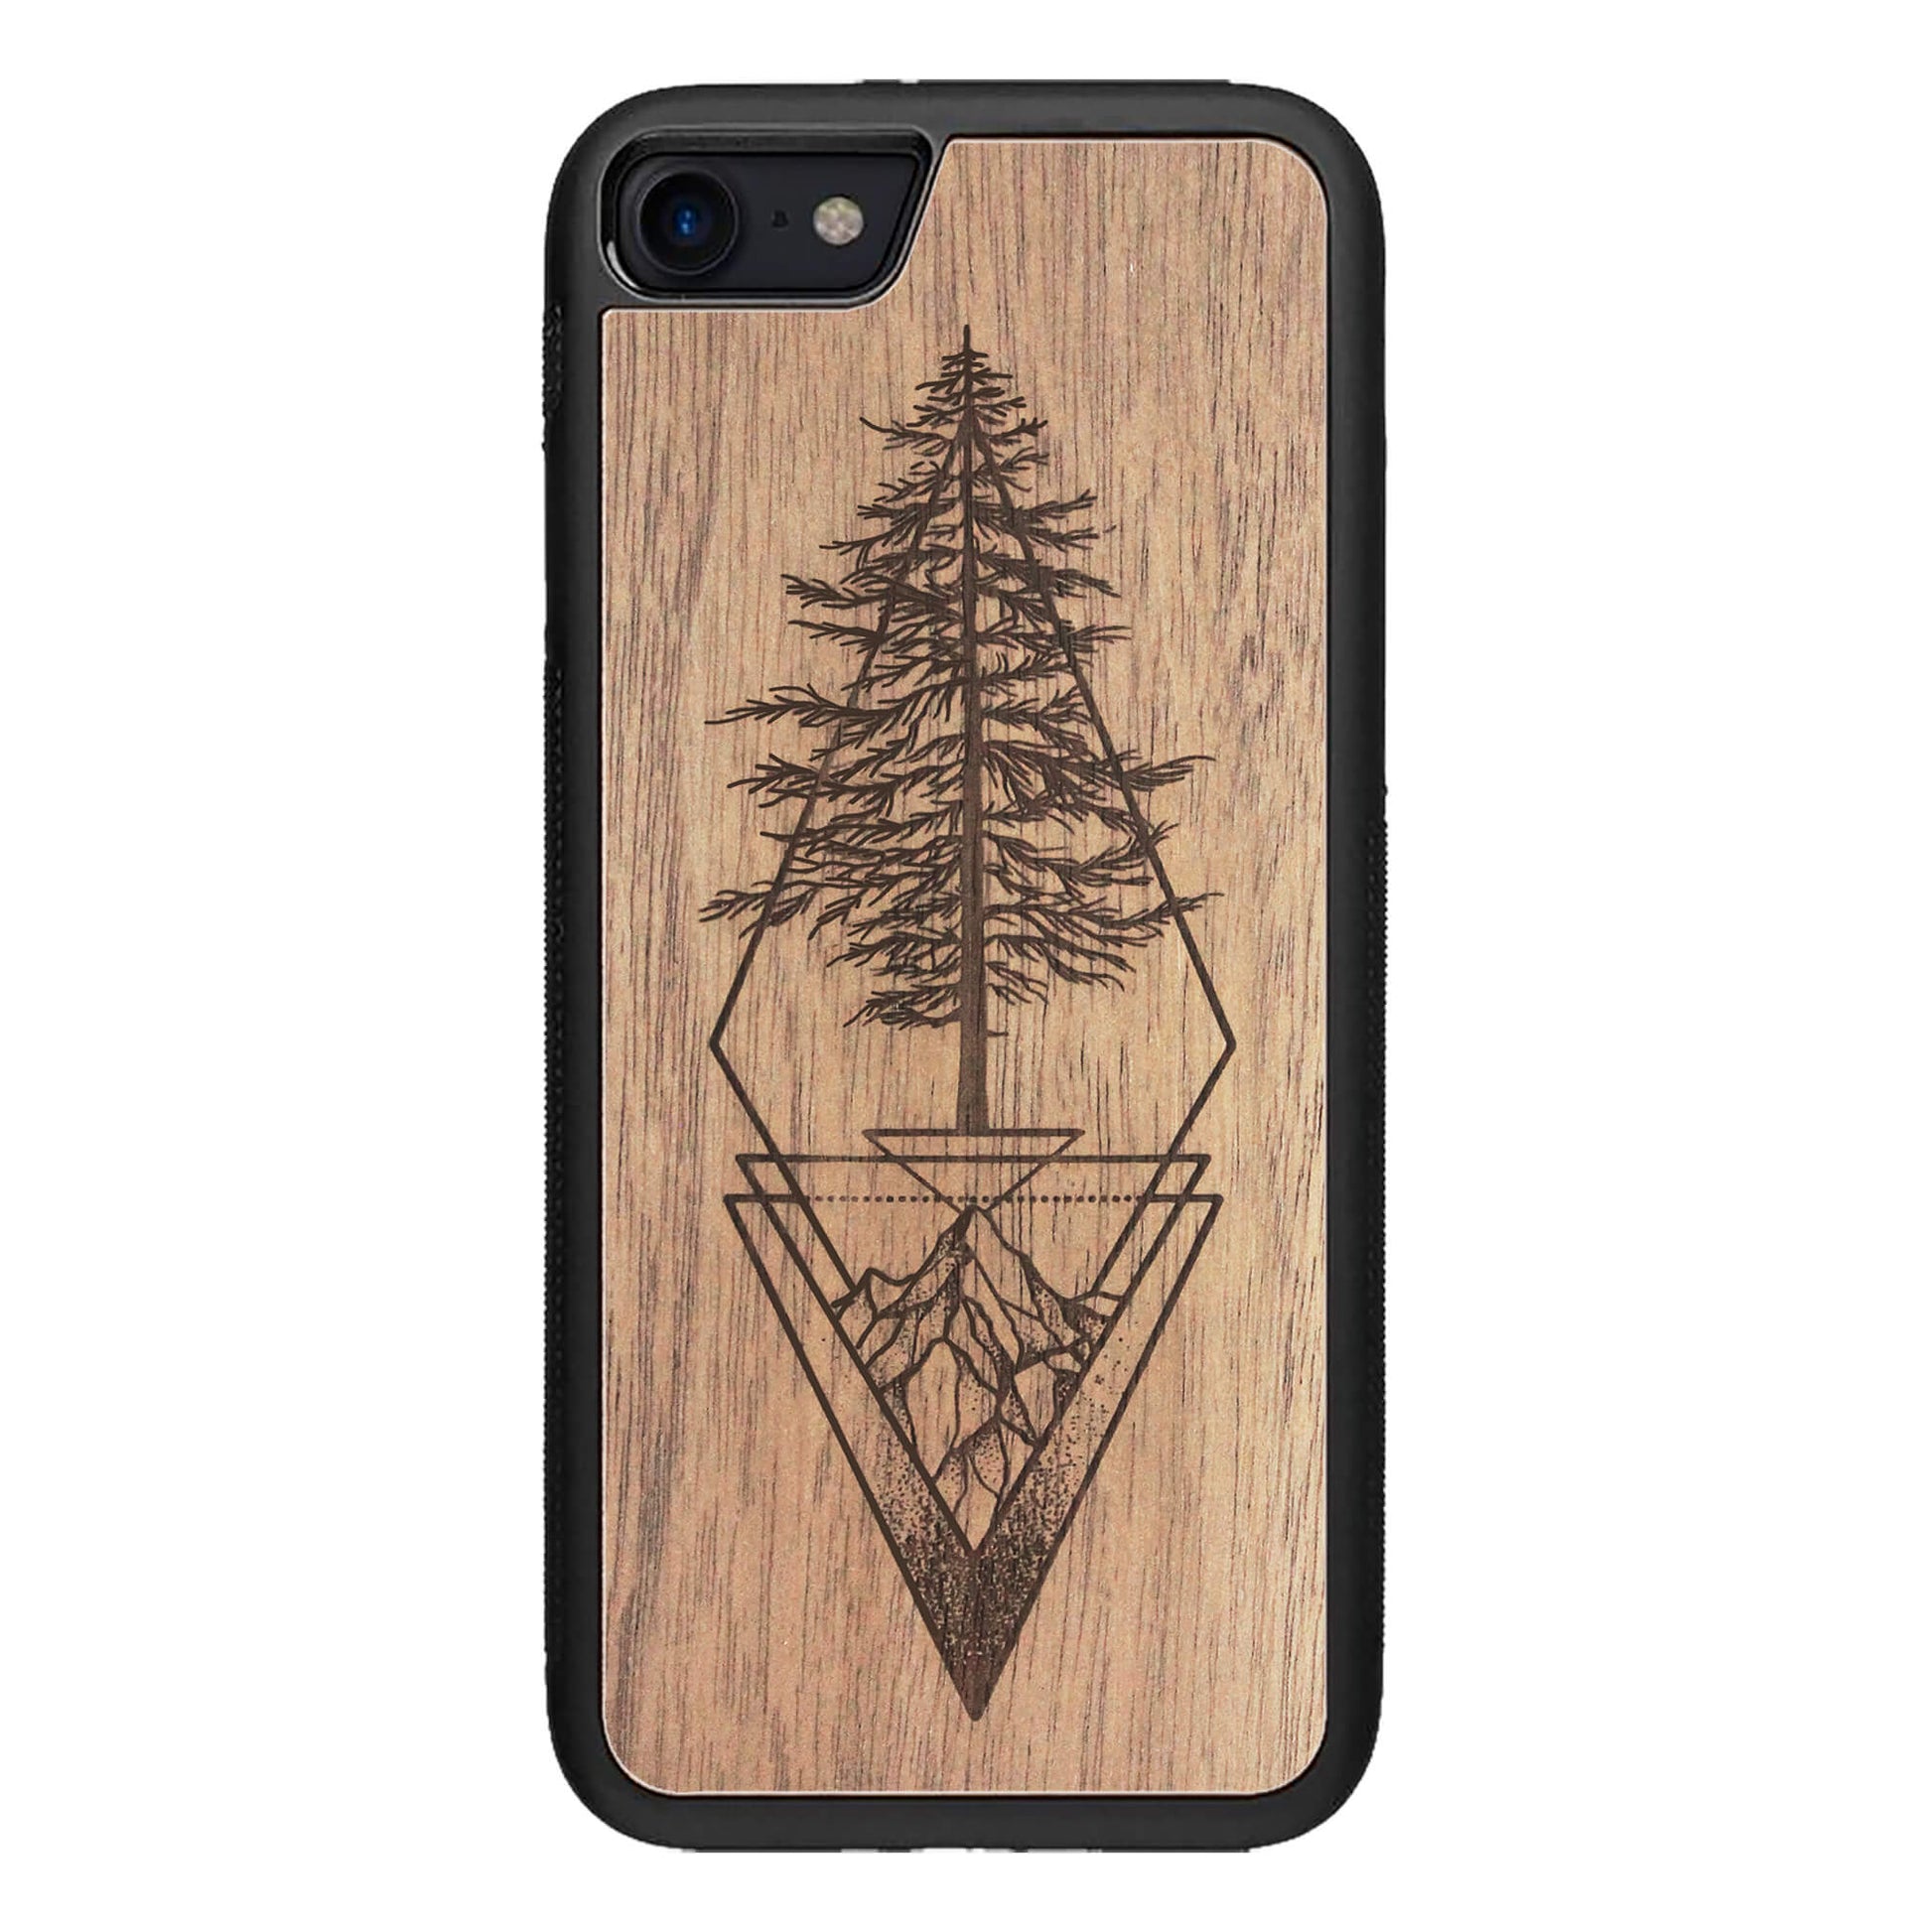 Wooden Case for iPhone SE 3 generation case Picea